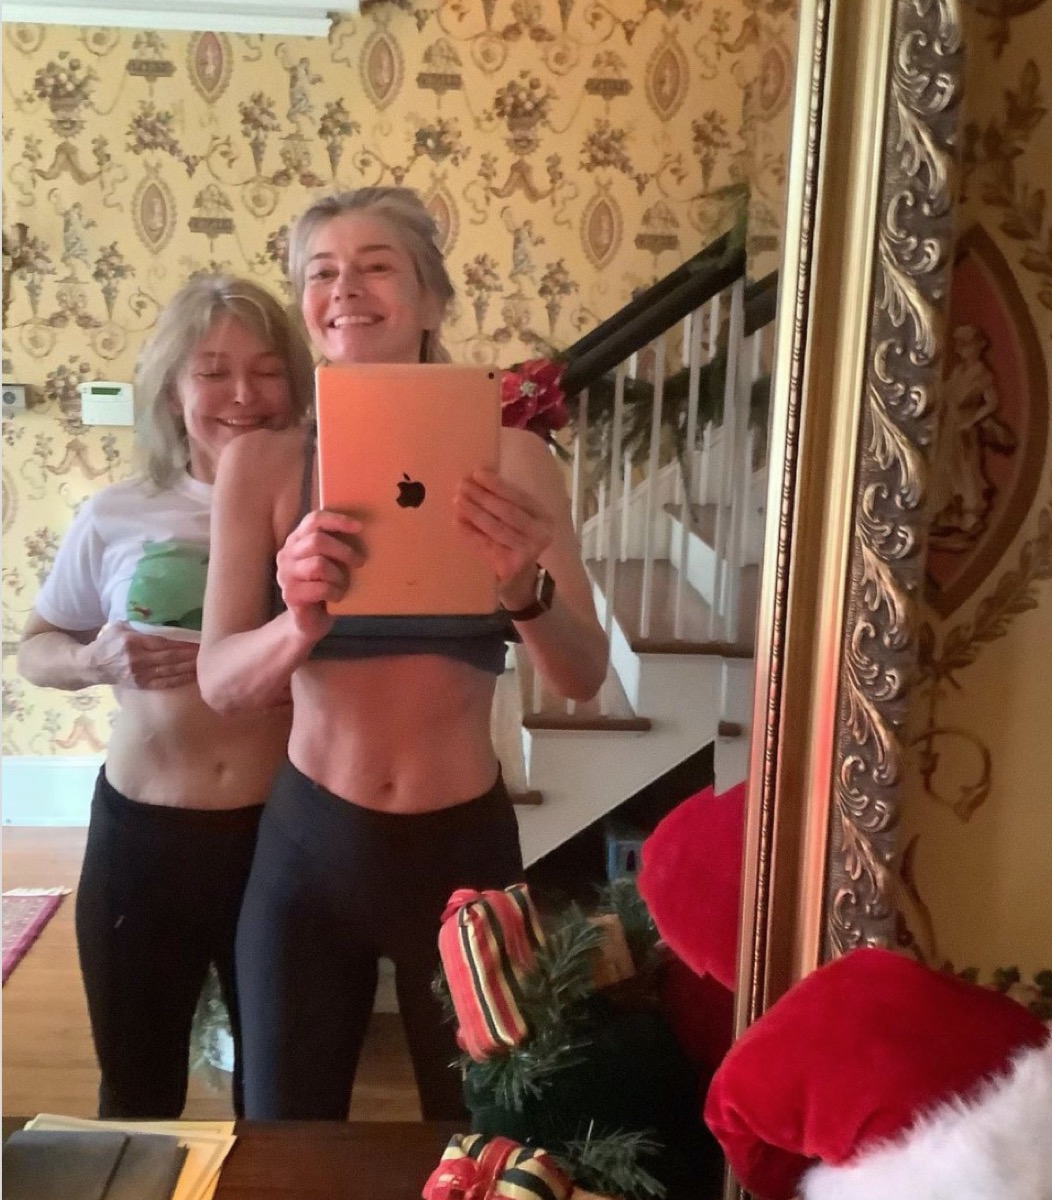 paulina porizkova and her mother showing their stomachs while taking a photo with an ipad in a mirror in a home